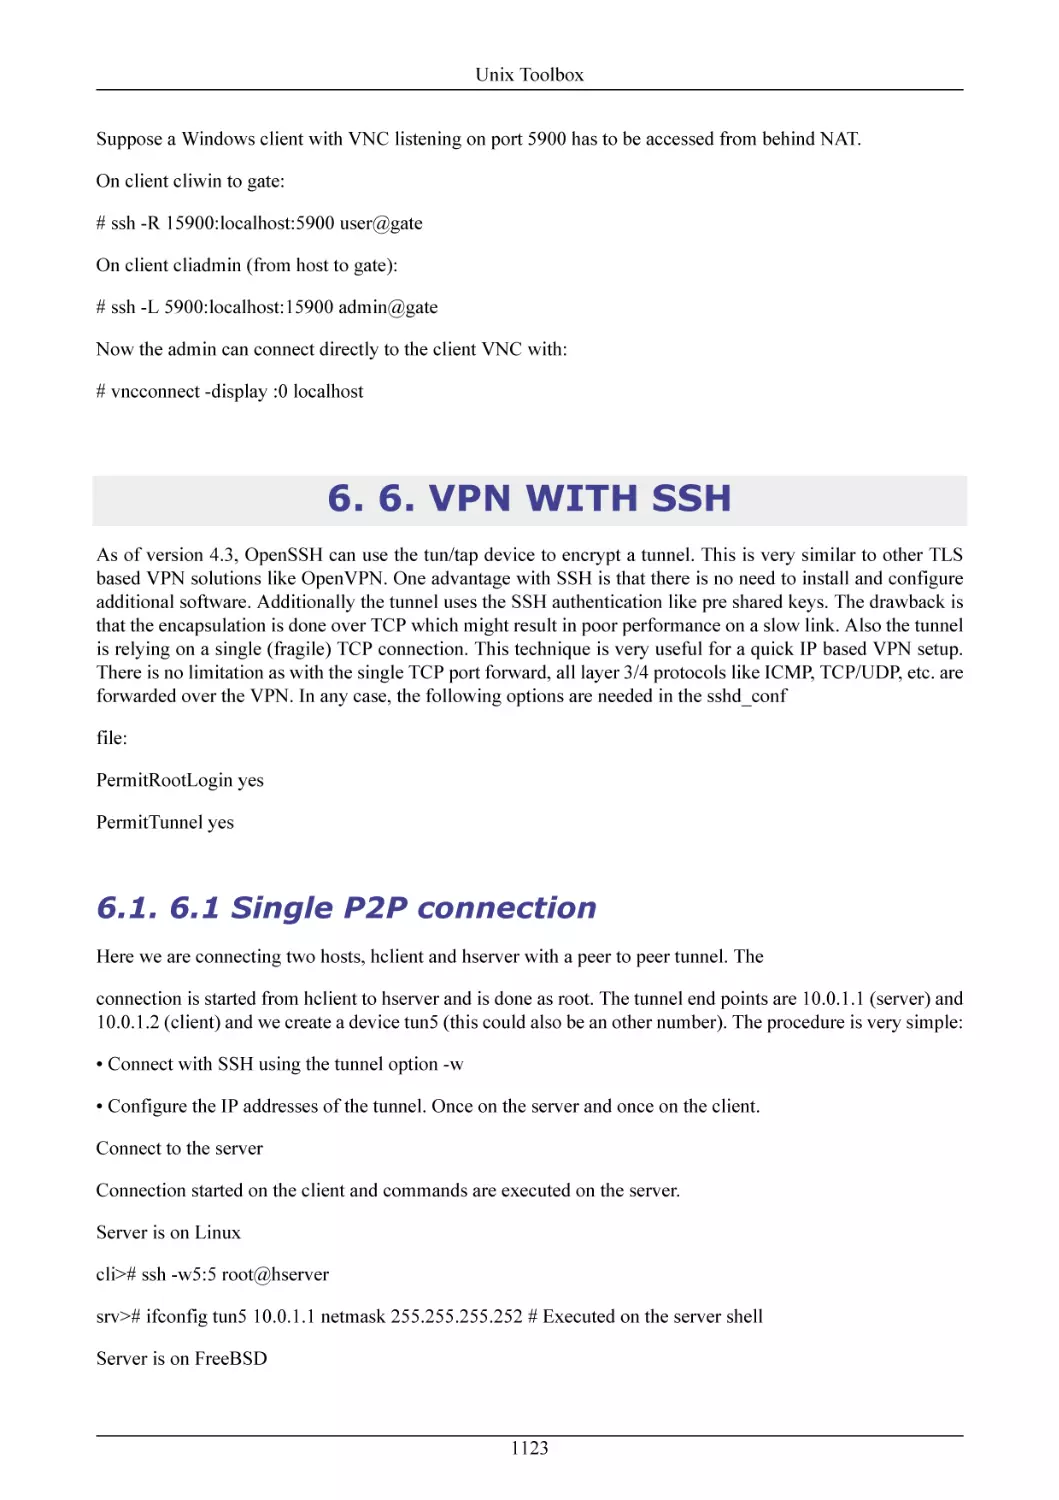 6. VPN WITH SSH
6.1 Single P2P connection